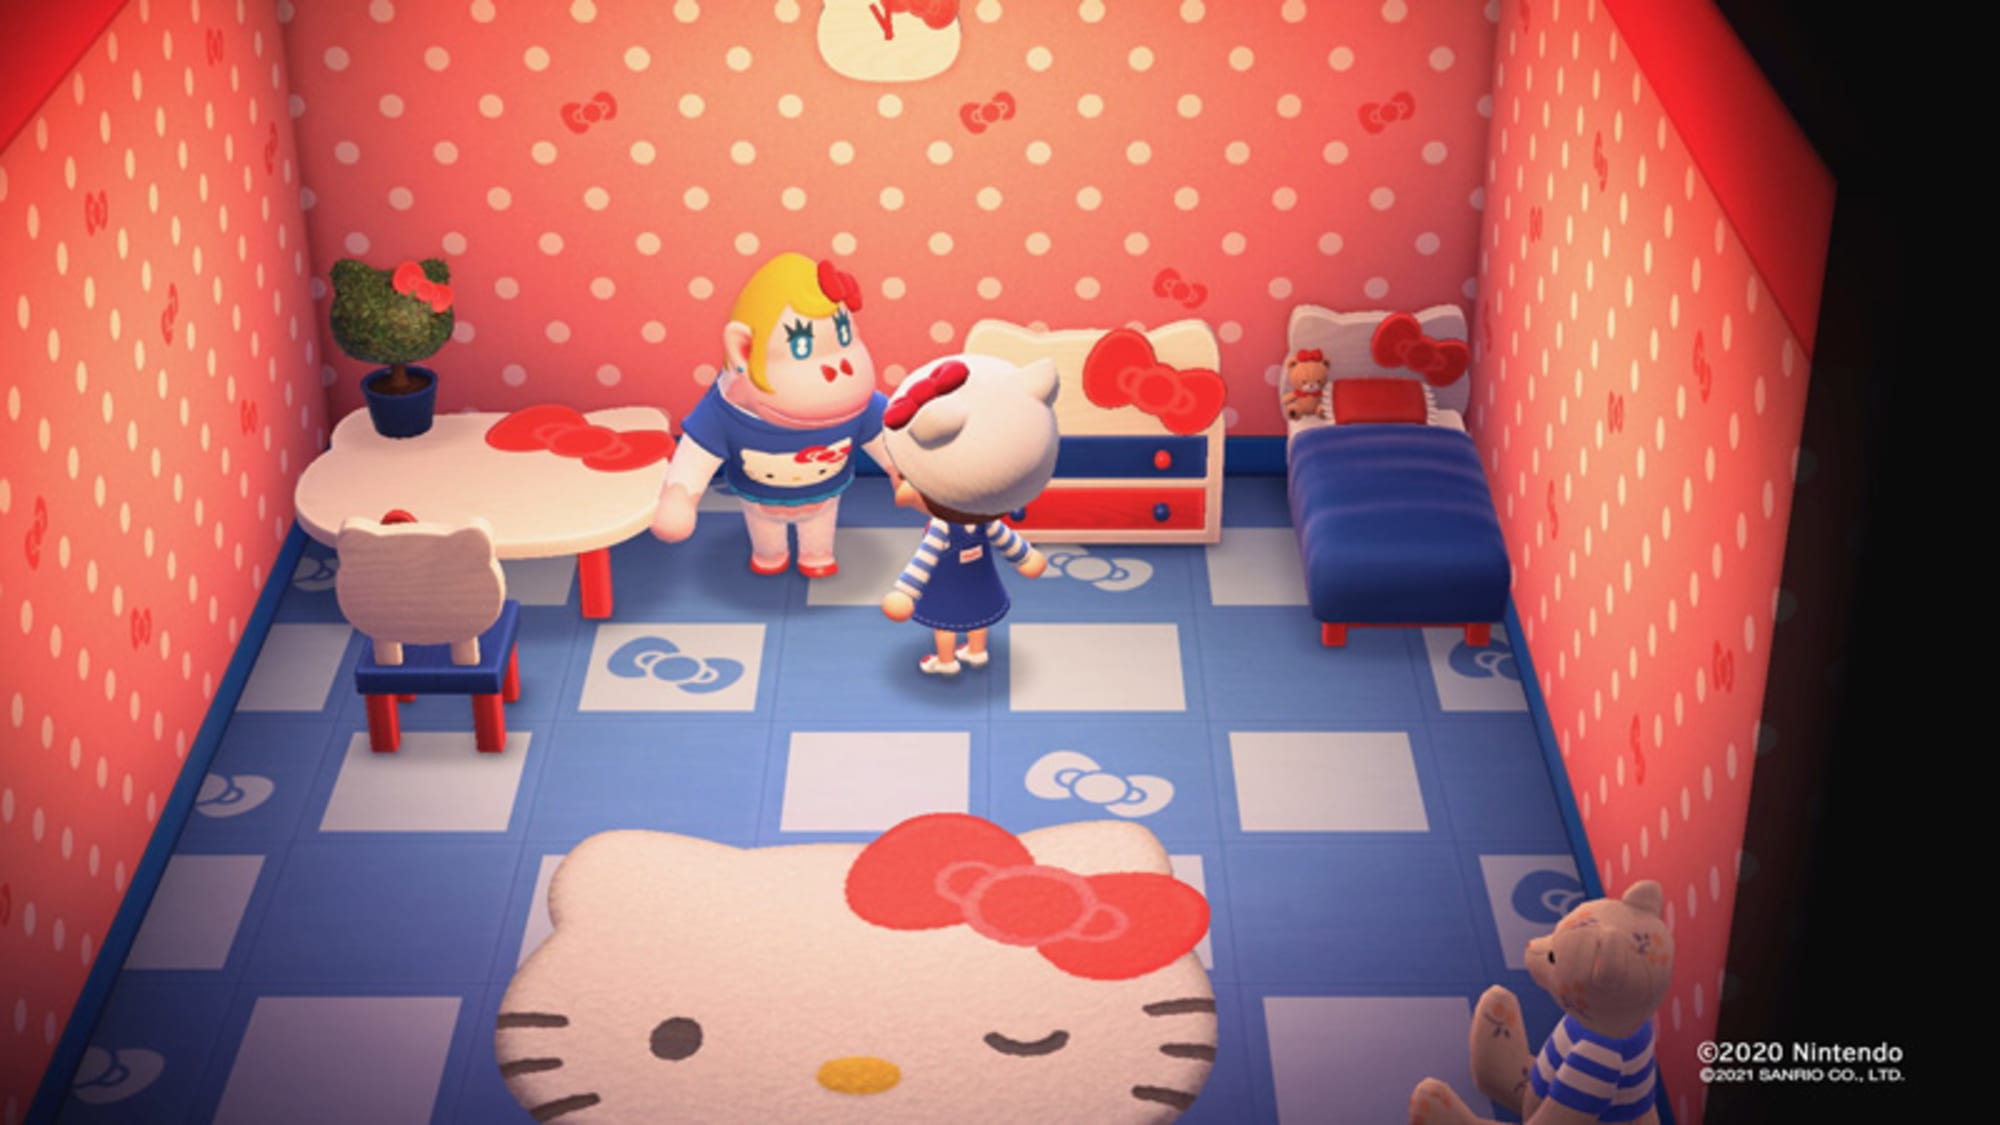 Preview: New 'Hello Kitty' brings 'Animal Crossing' vibes to Apple